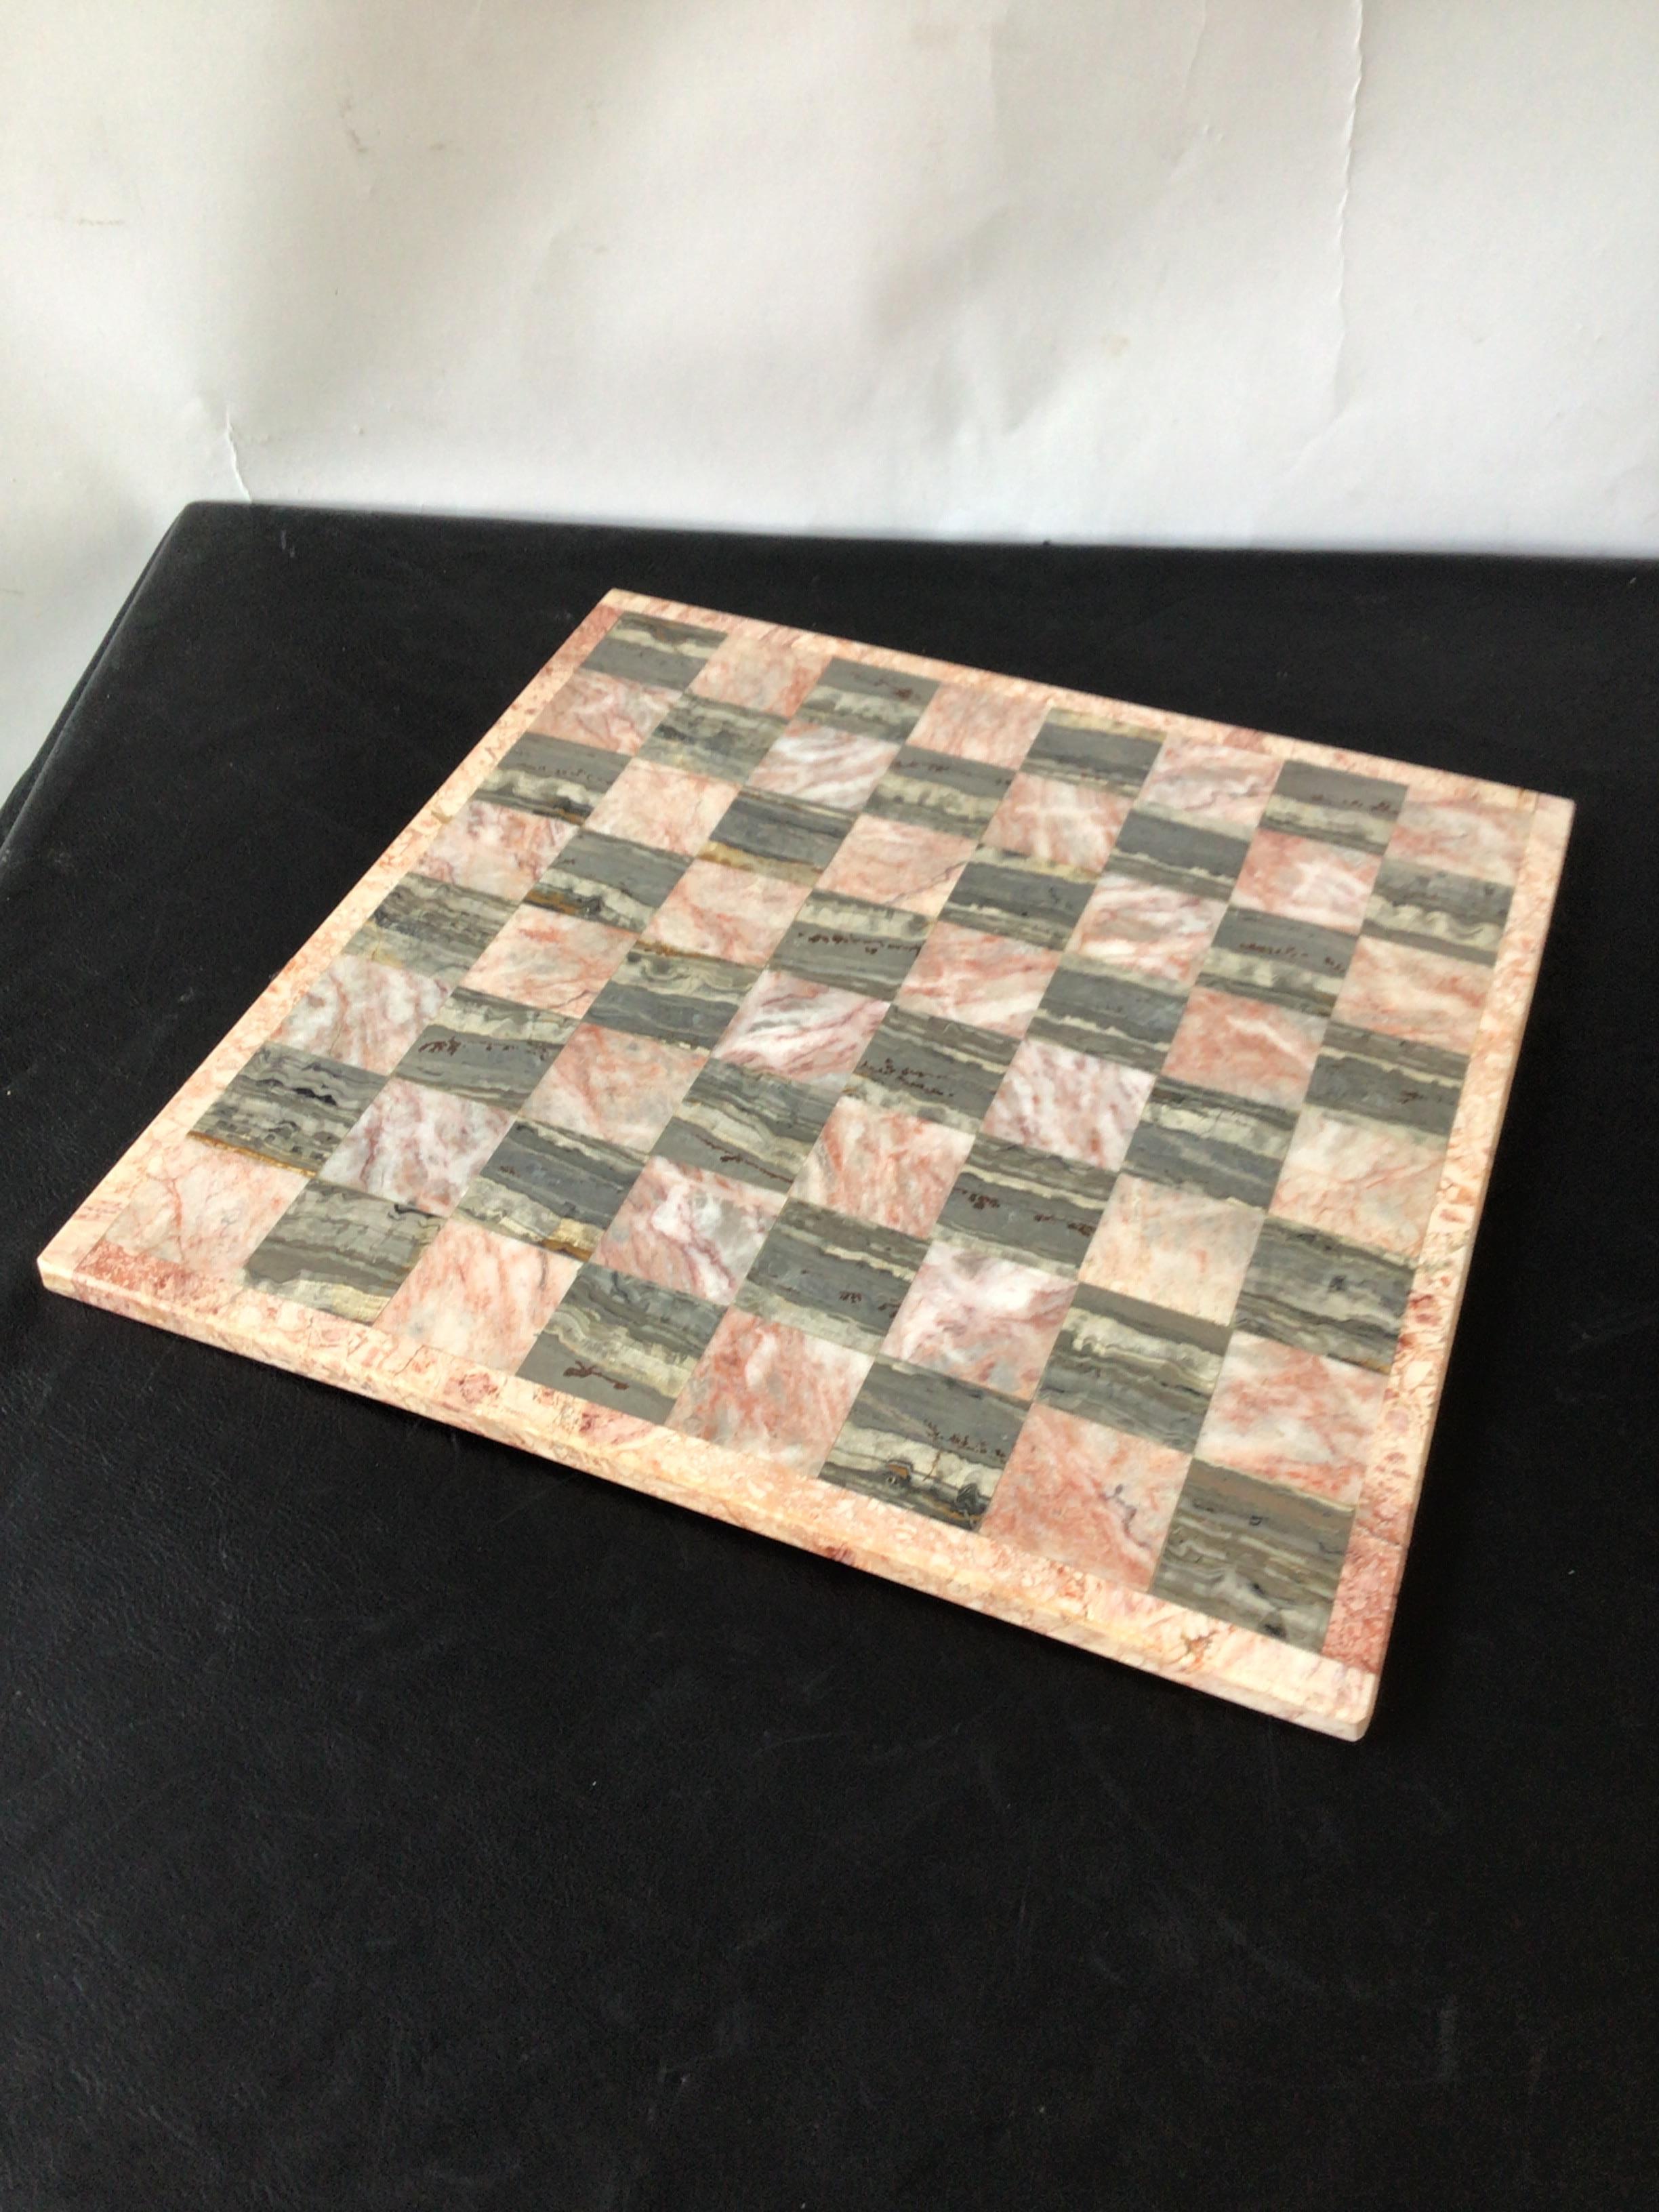 Inlaid marble chess board.